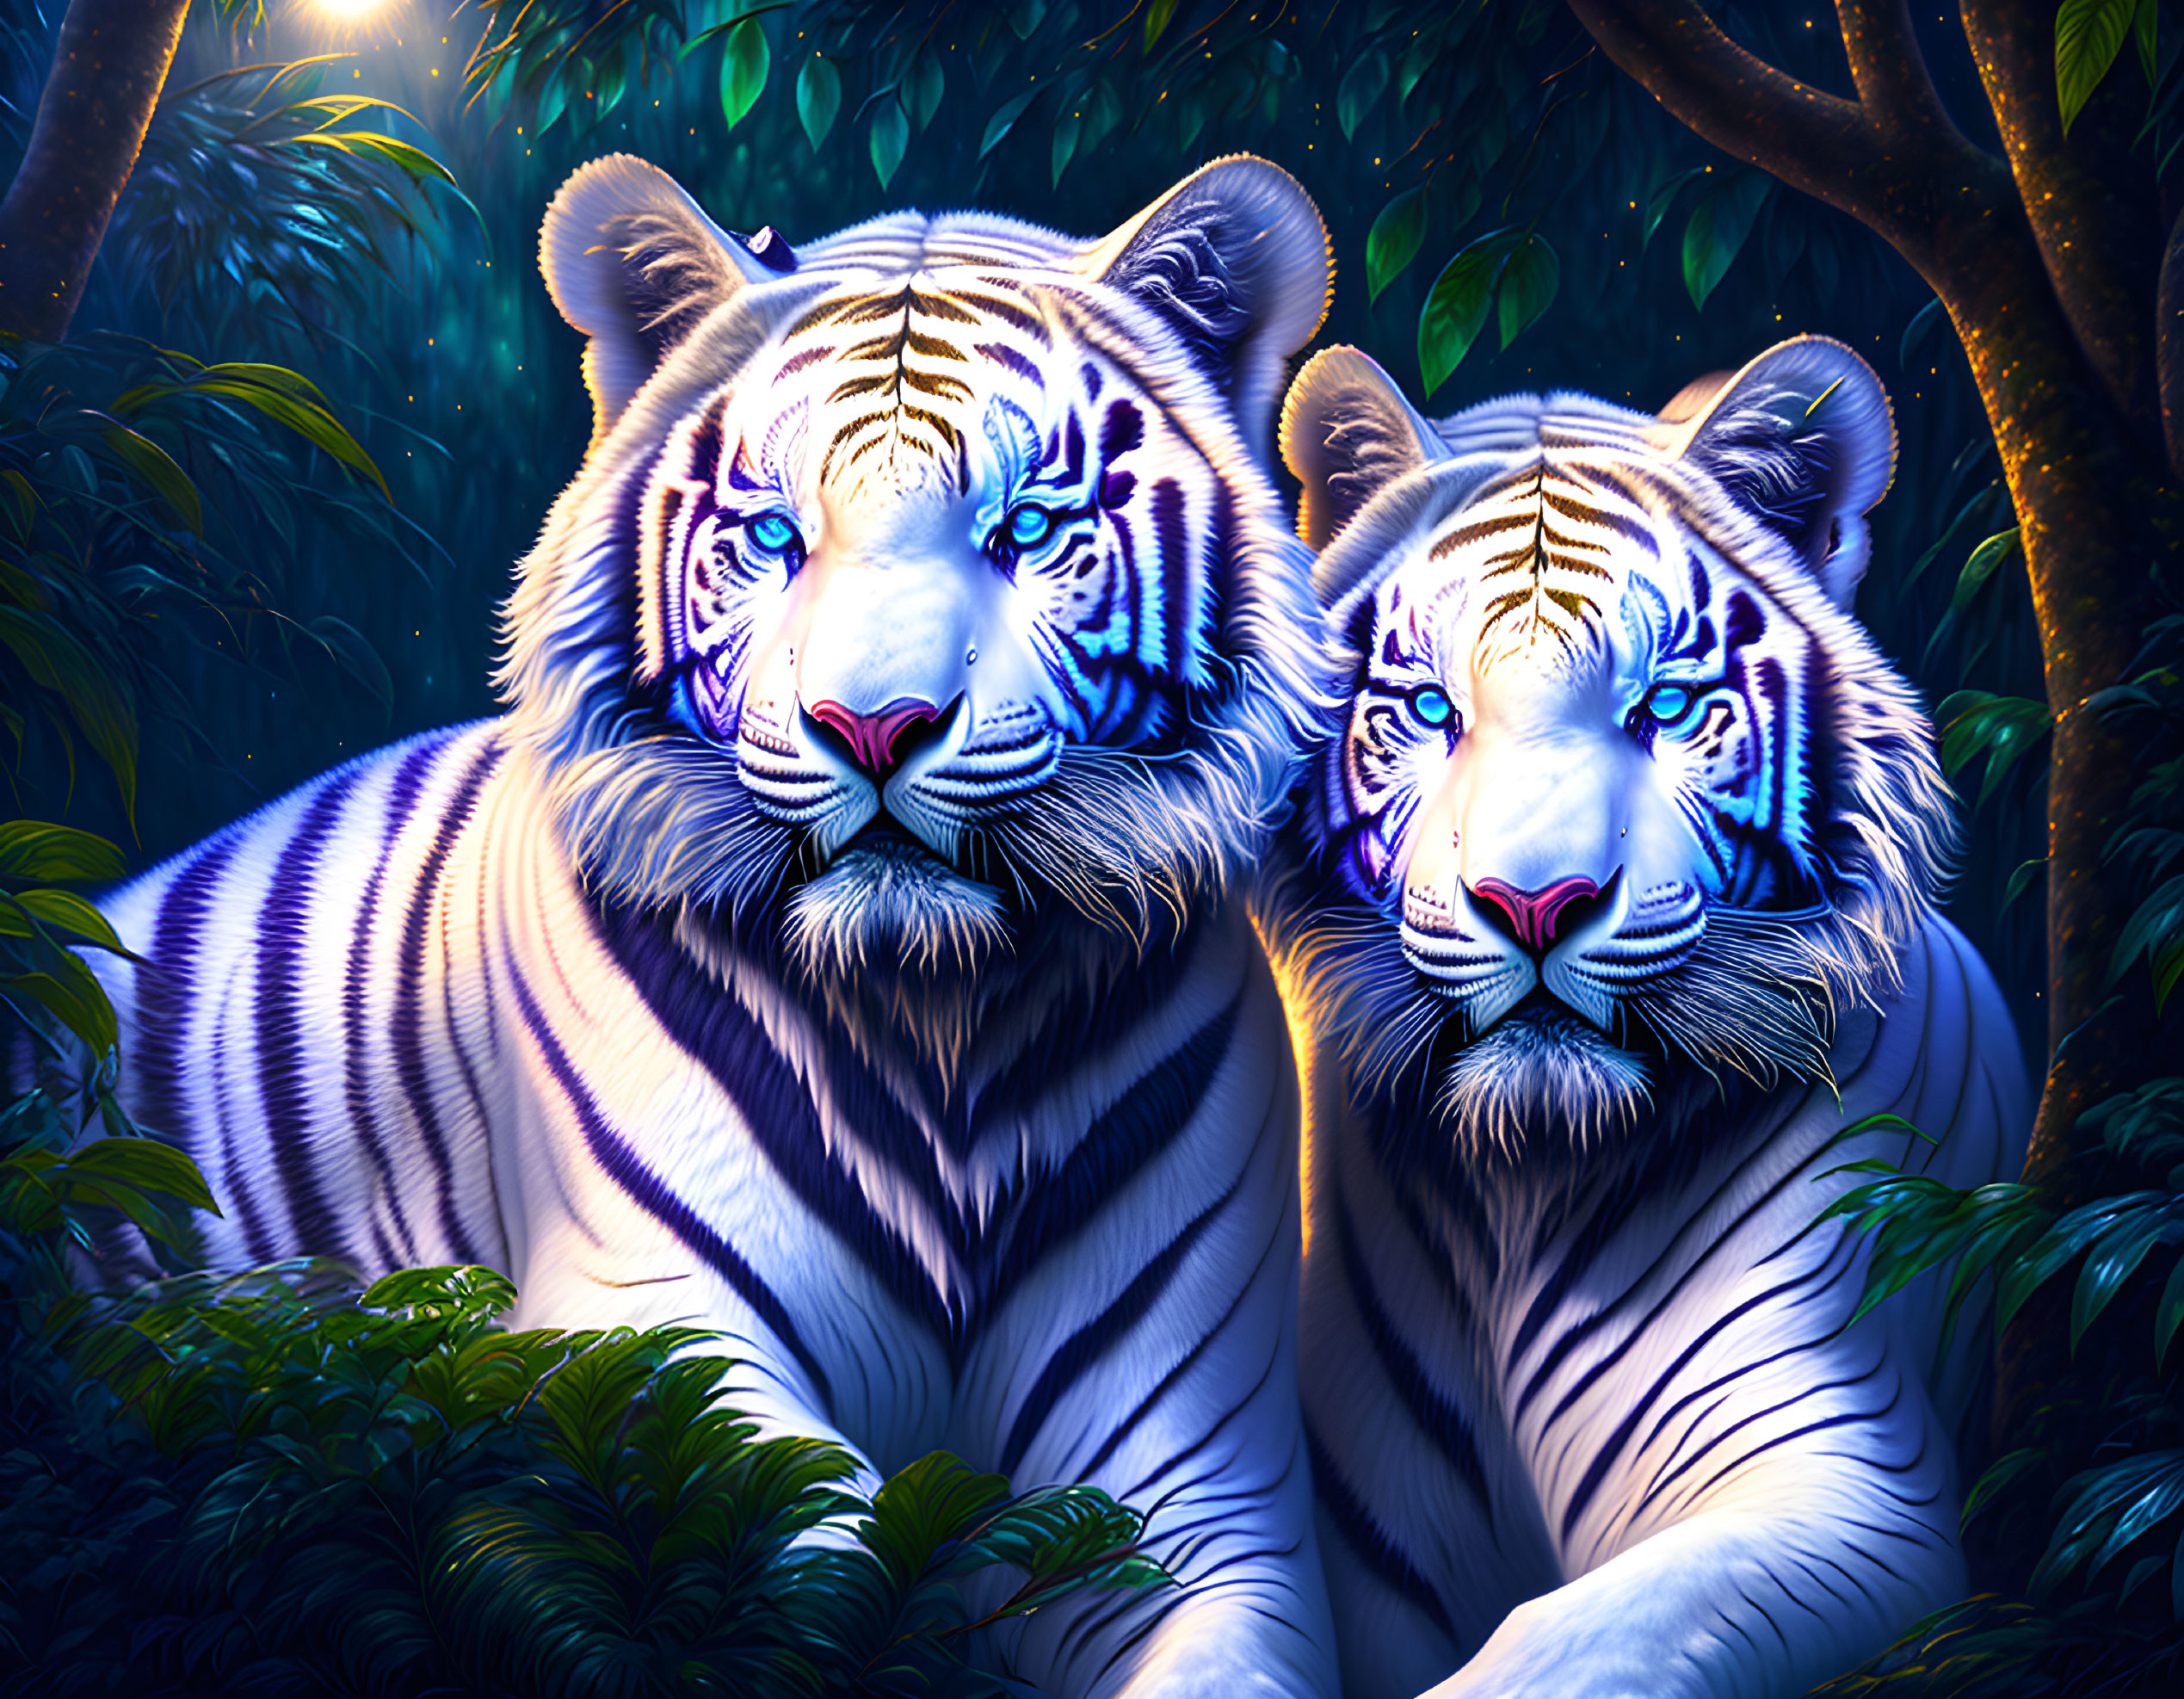 White Tigers in the Woods